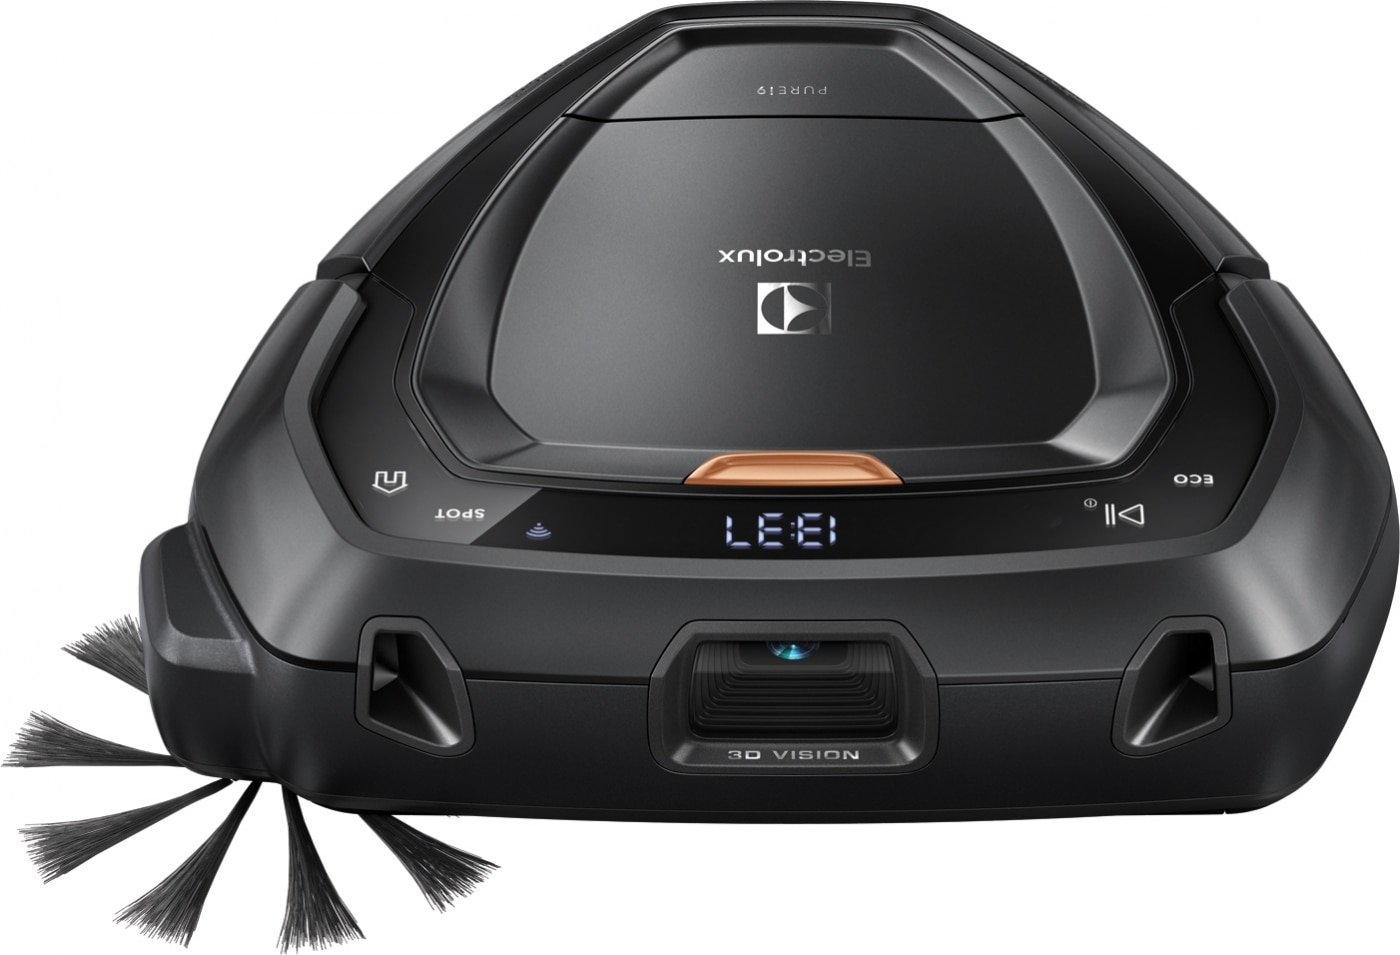 Electrolux launches Pure i9 robotic vacuum in the United States